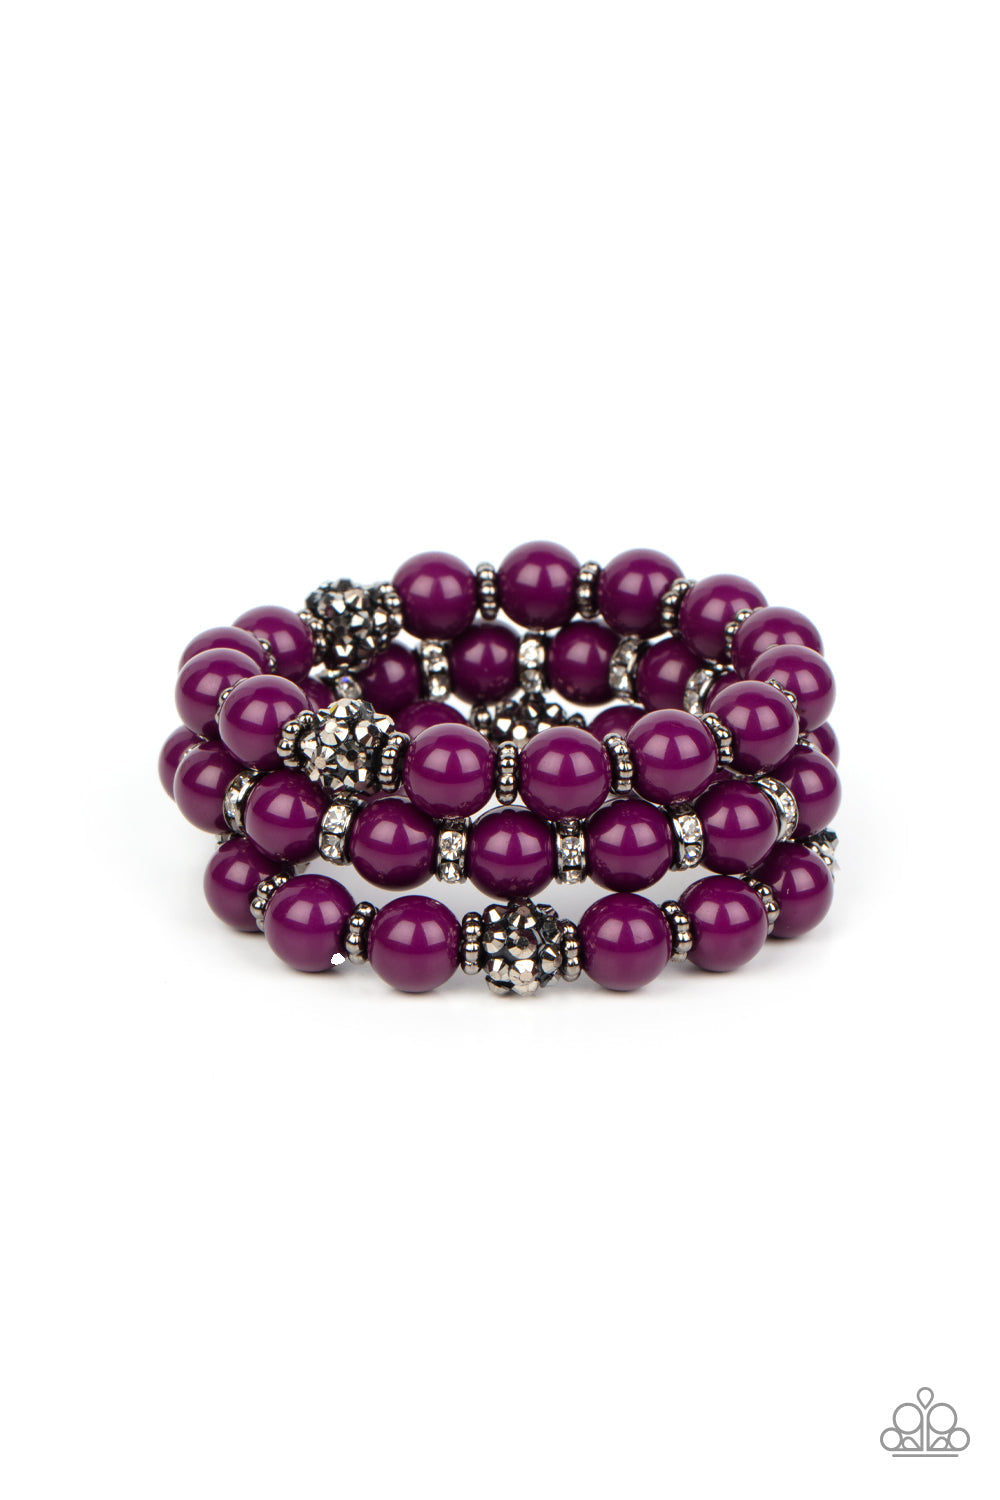 Poshly Packing - Dark Purple Bracelet - Paparazzi Accessories - A posh collection of polished purple beads, studded gunmetal rings, white rhinestone encrusted rings, and hematite dotted beads are threaded along stretchy bands around the wrist, creating sassy layers. Sold as one set of three bracelets.  Bejeweled Accessories By Kristie - Trendy fashion jewelry for everyone -